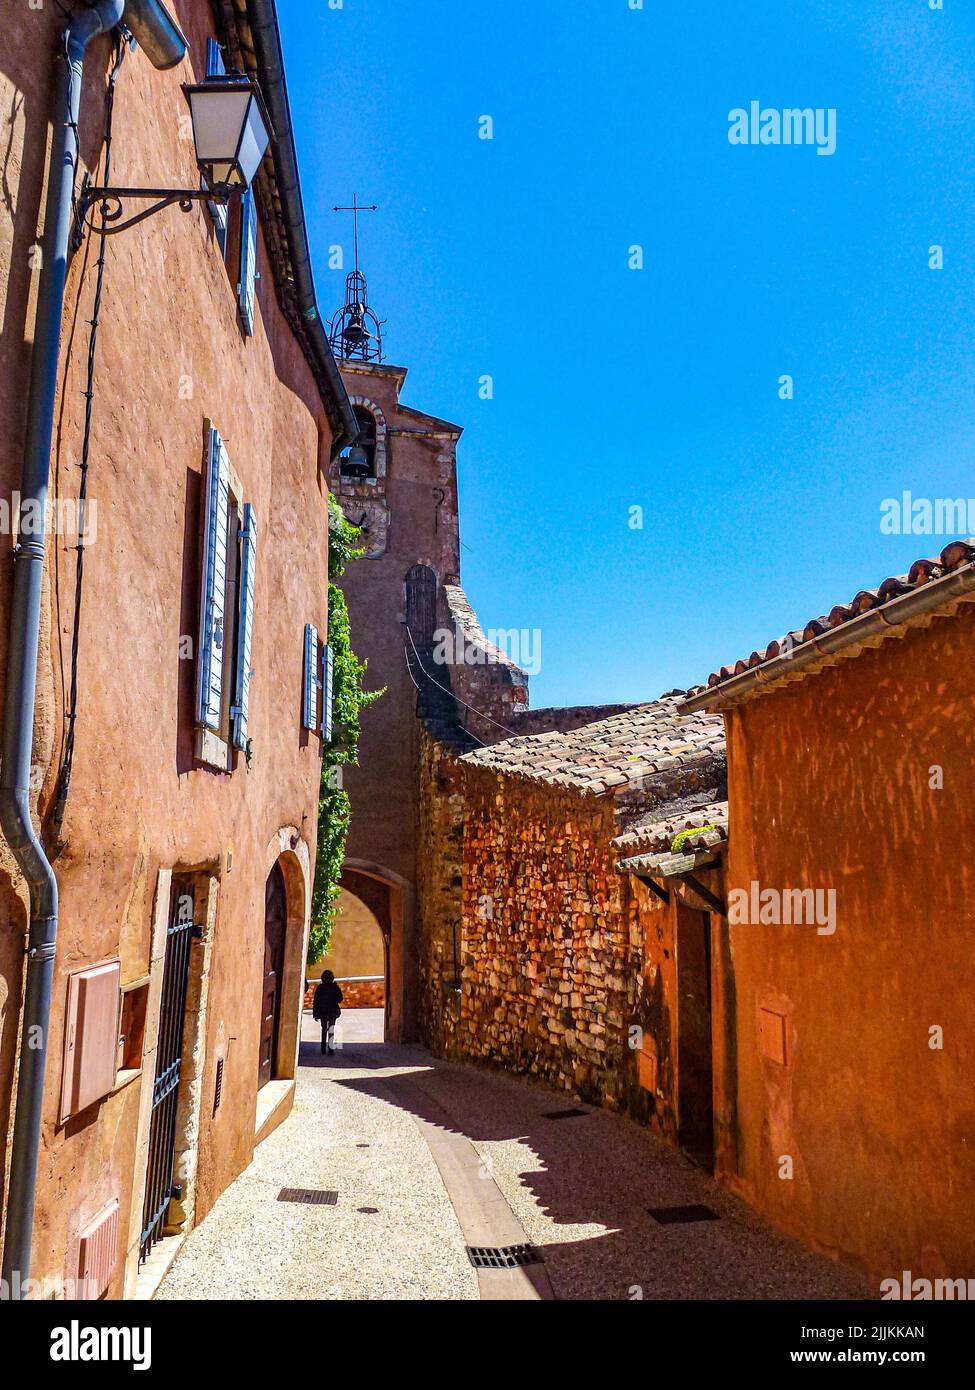 A narrow street with old buildings on a sunny day Stock Photo